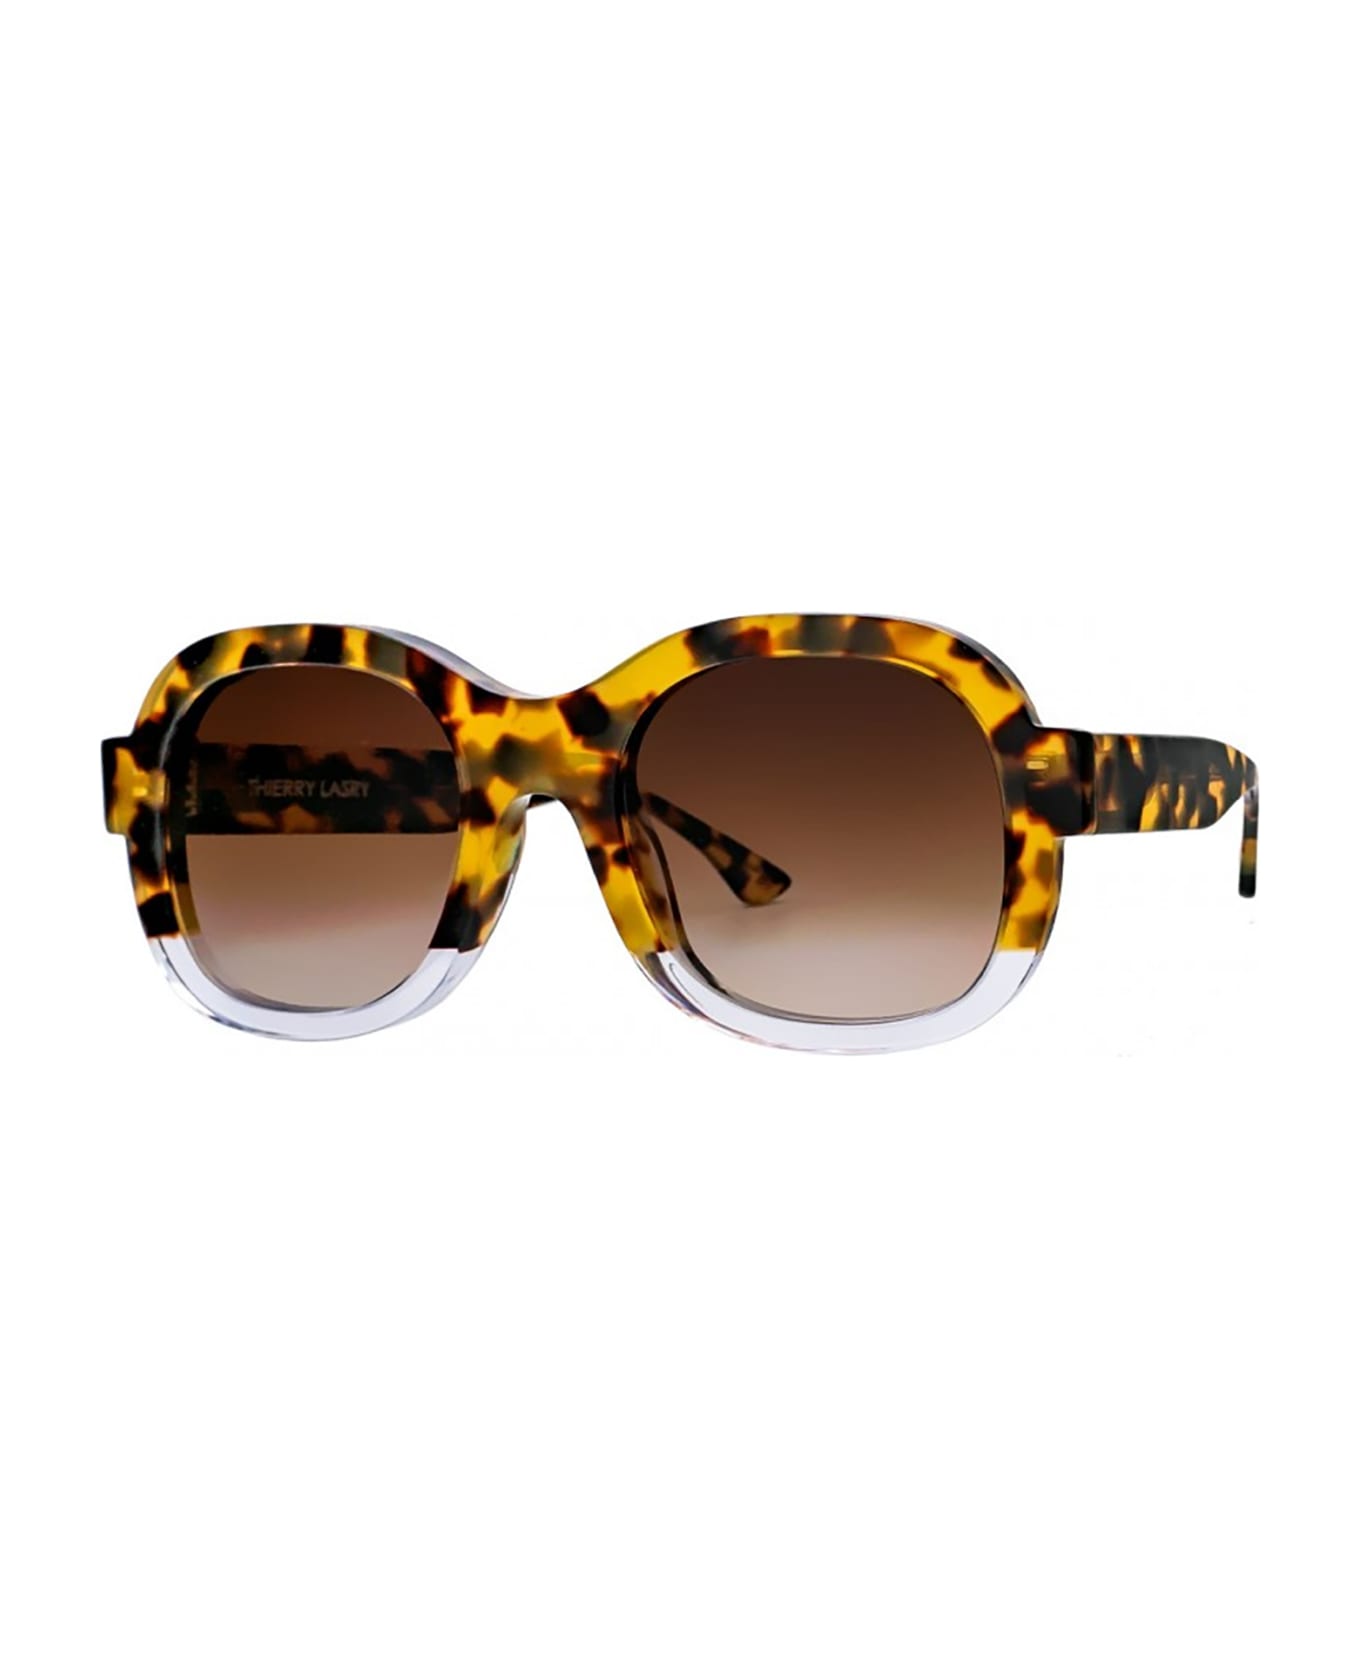 Thierry Lasry DAYDREAMY Sunglasses